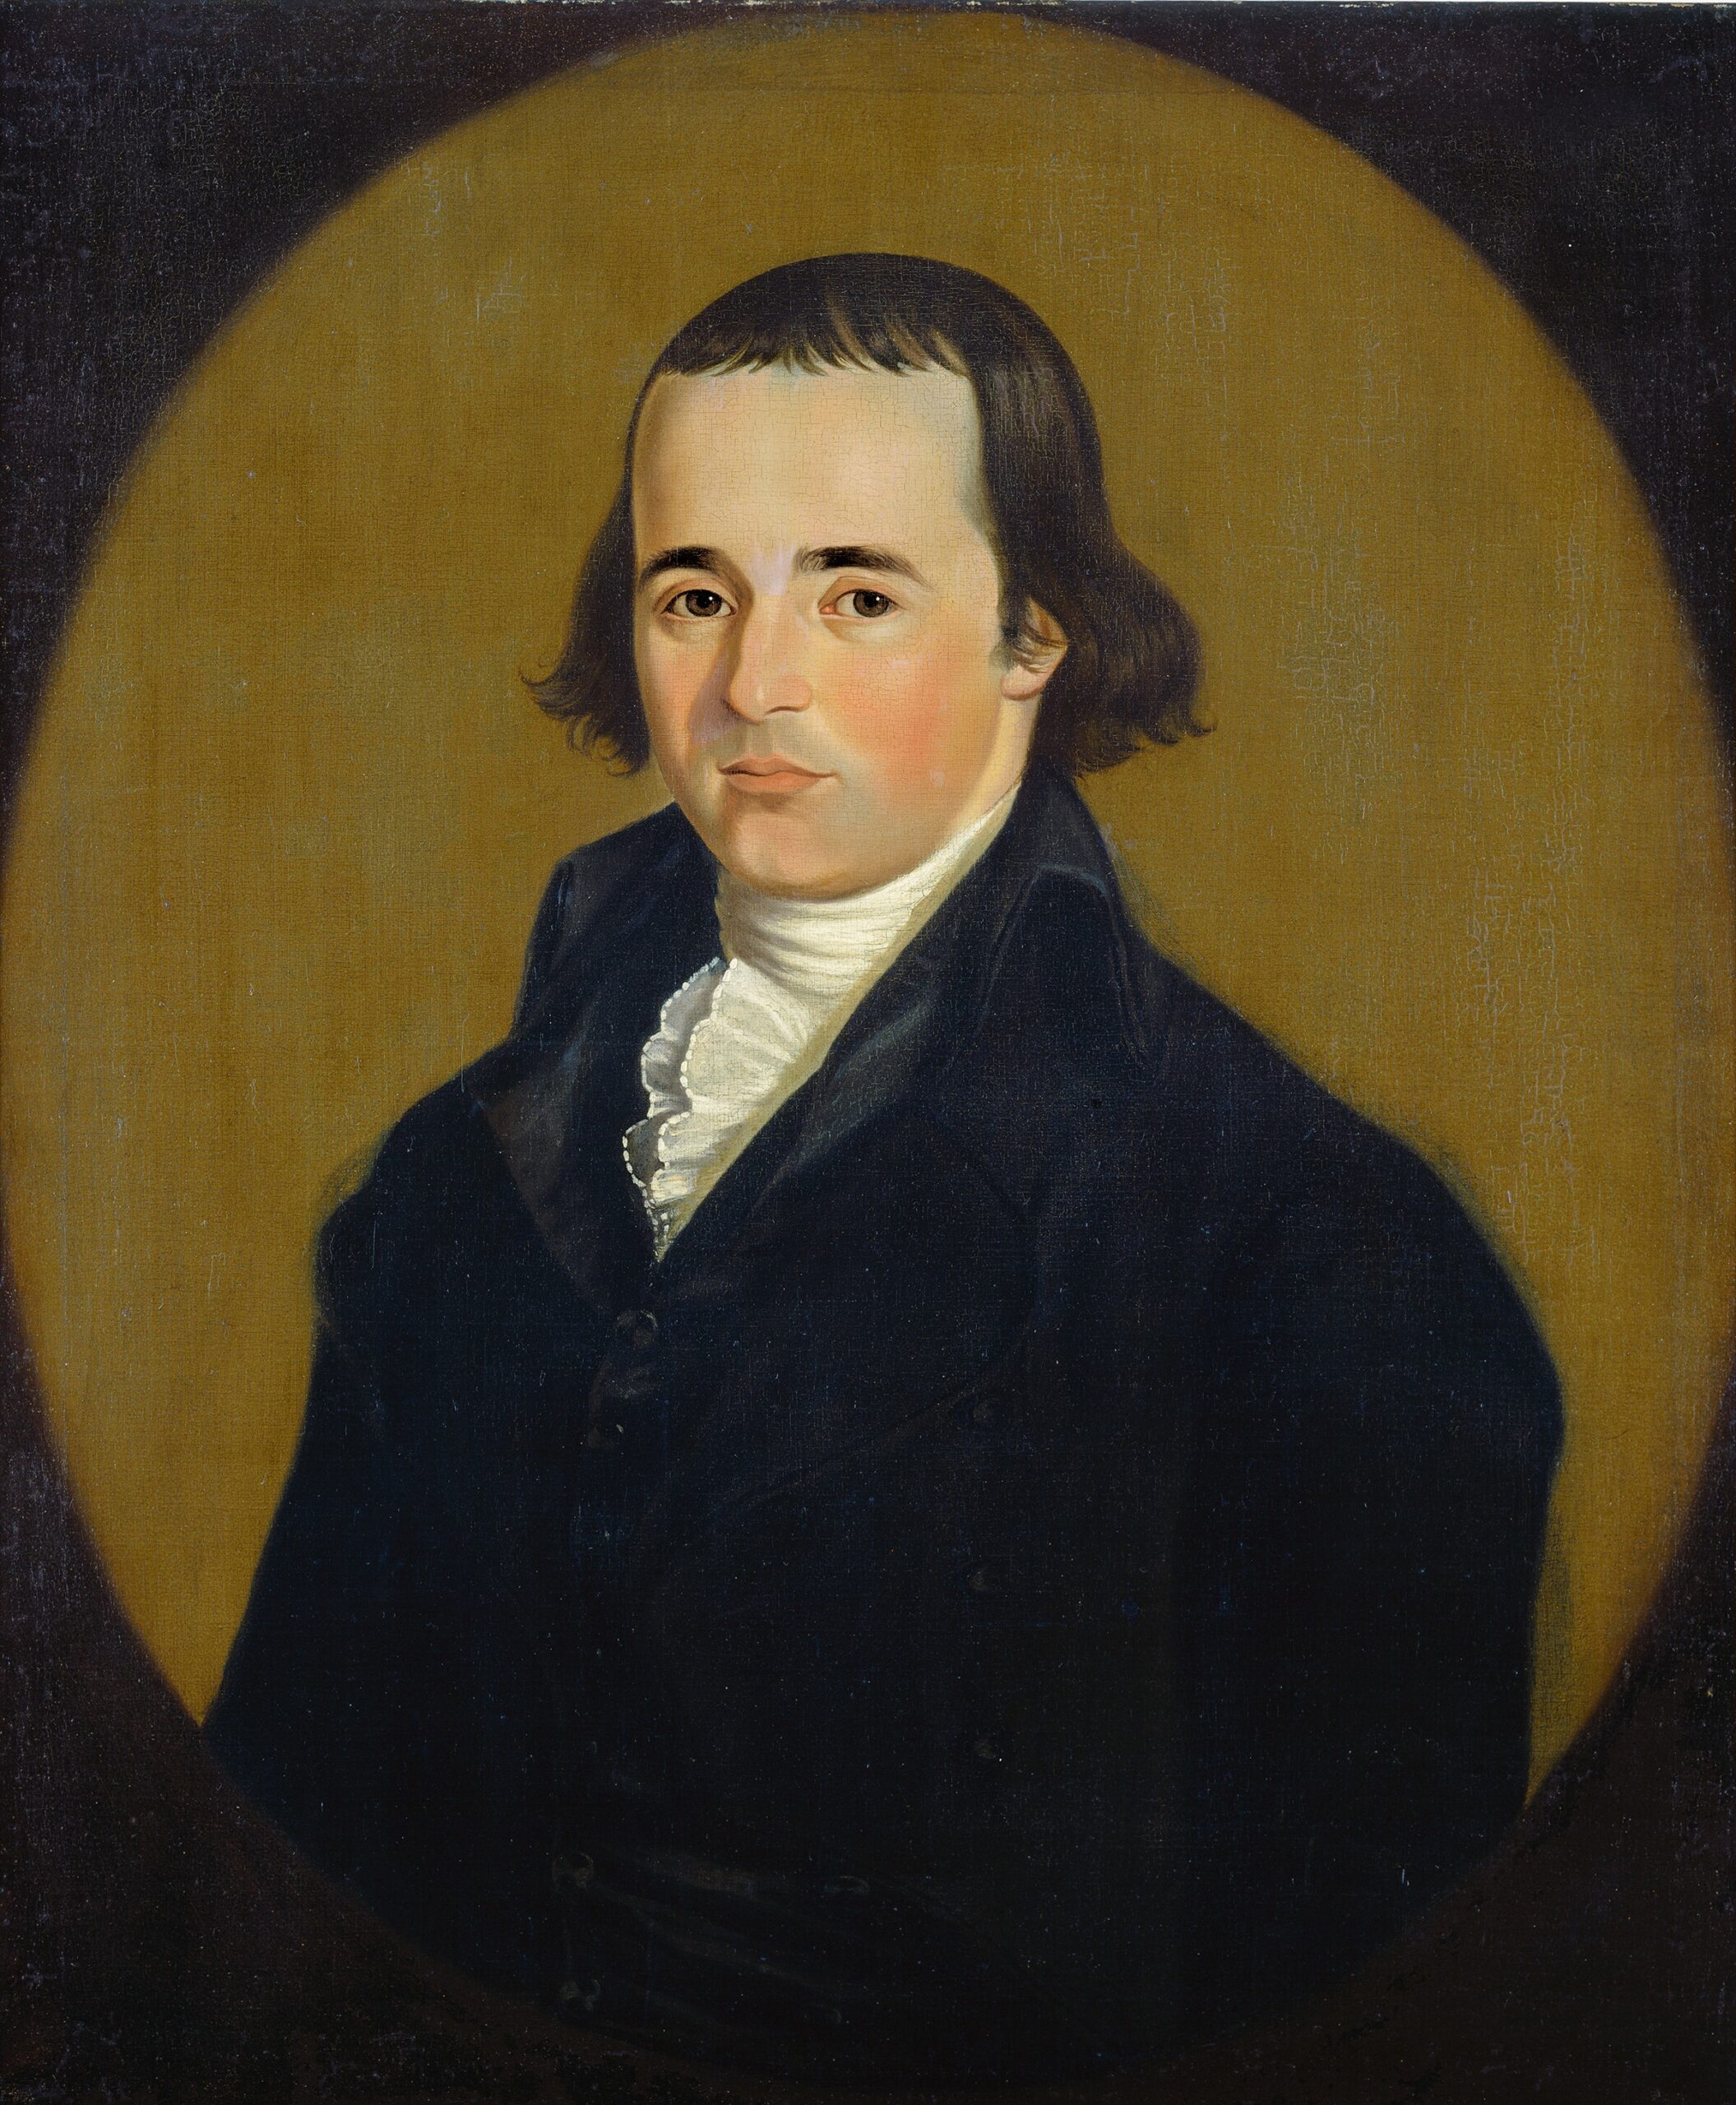 Painted oval portrait of a man in a dark coat and white collar